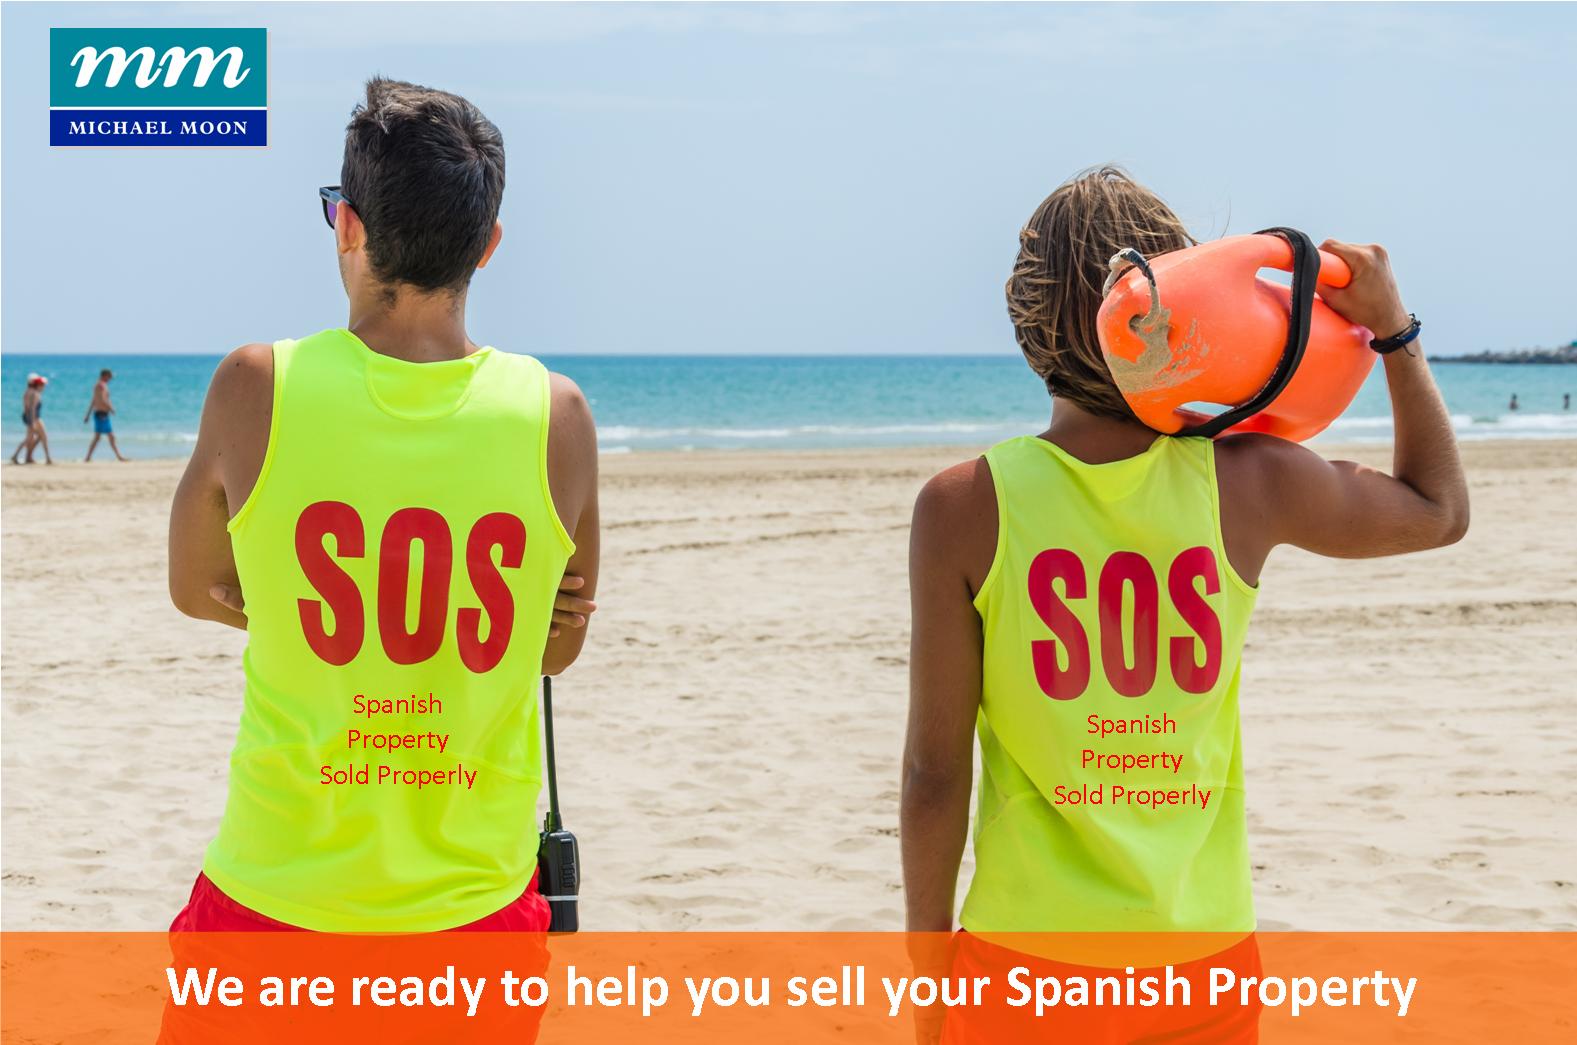 Are you thinking of selling your property in Marbella?